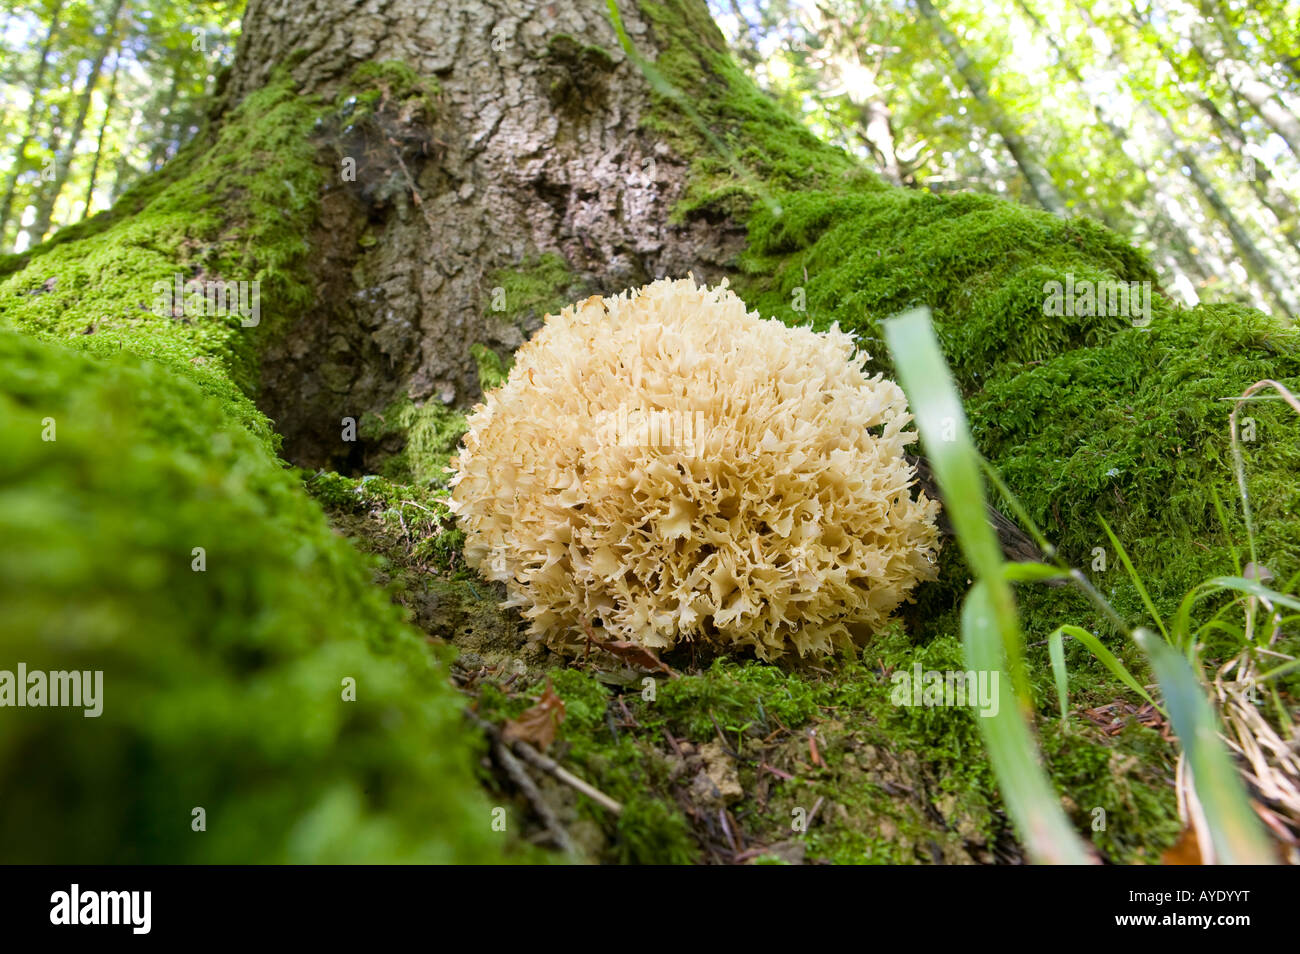 fungi, woodlands, autumn, toadstalls, mushrooms, close, up, wildlife, nature, cover, upright, full, page, forest, plant, green Stock Photo